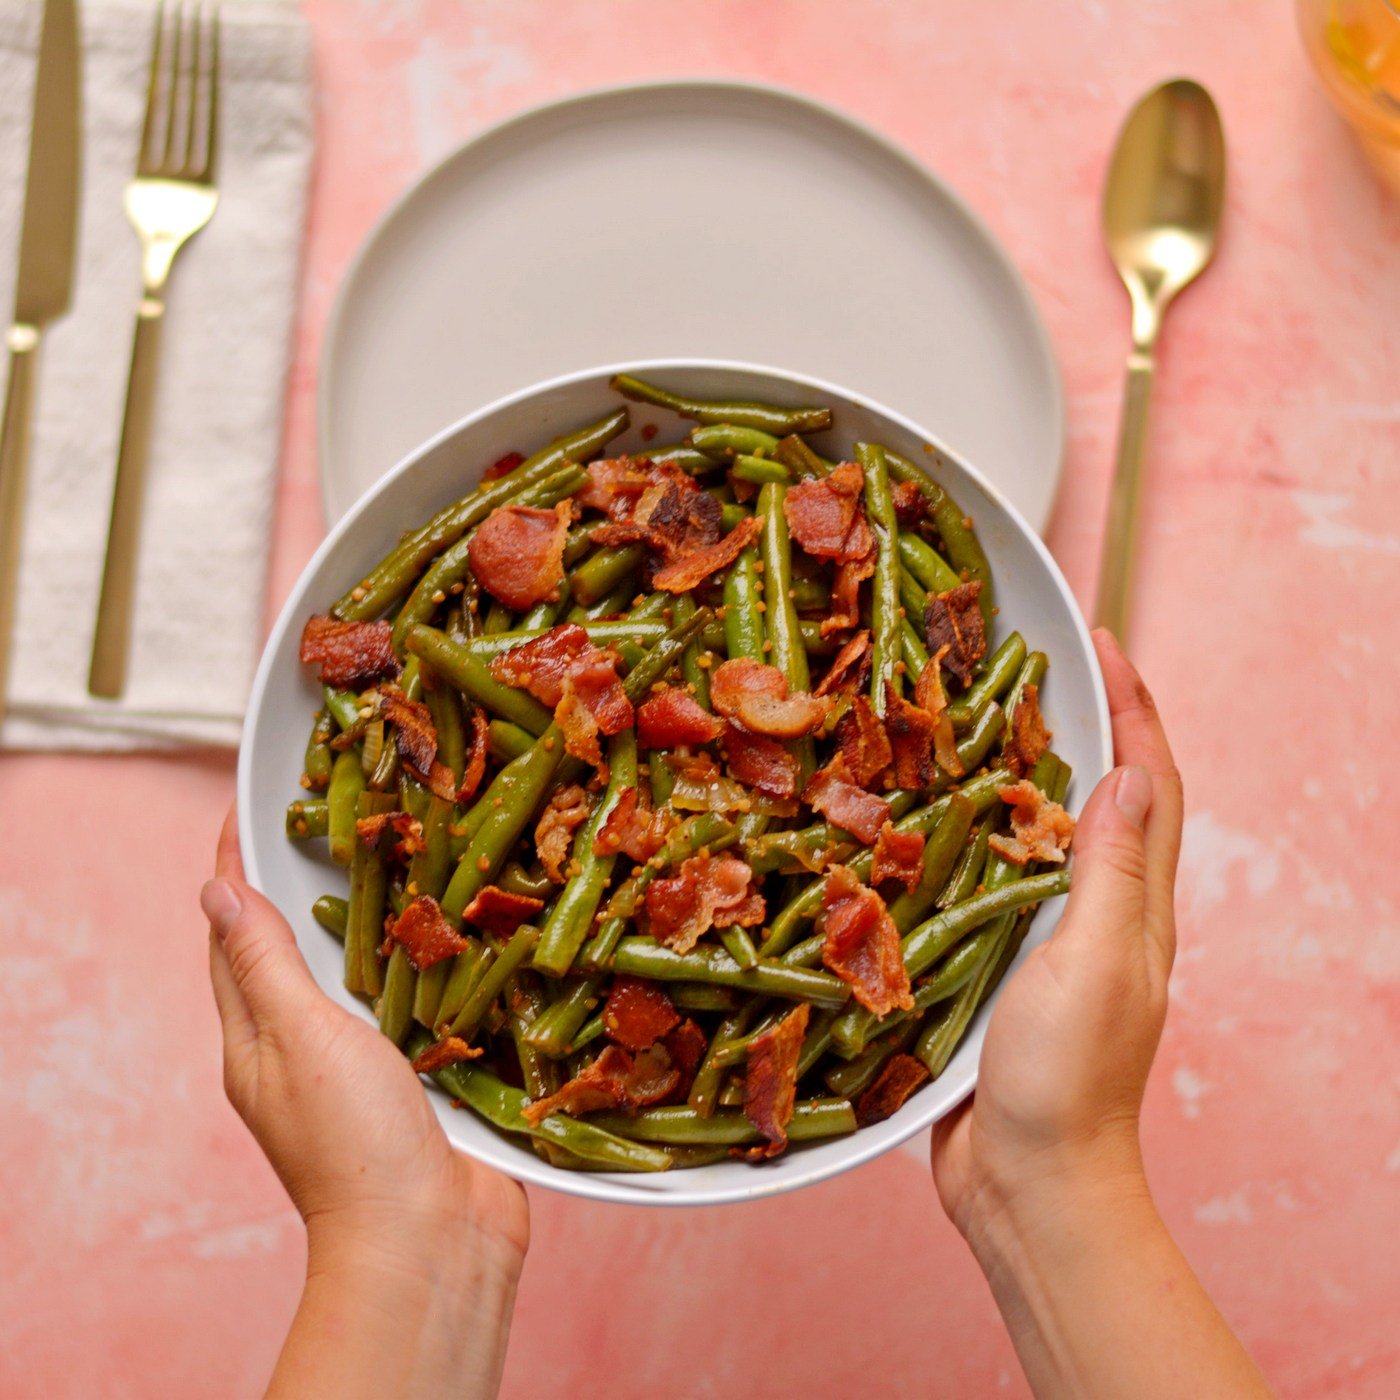 Setting down a bowl of bacon and green beans.